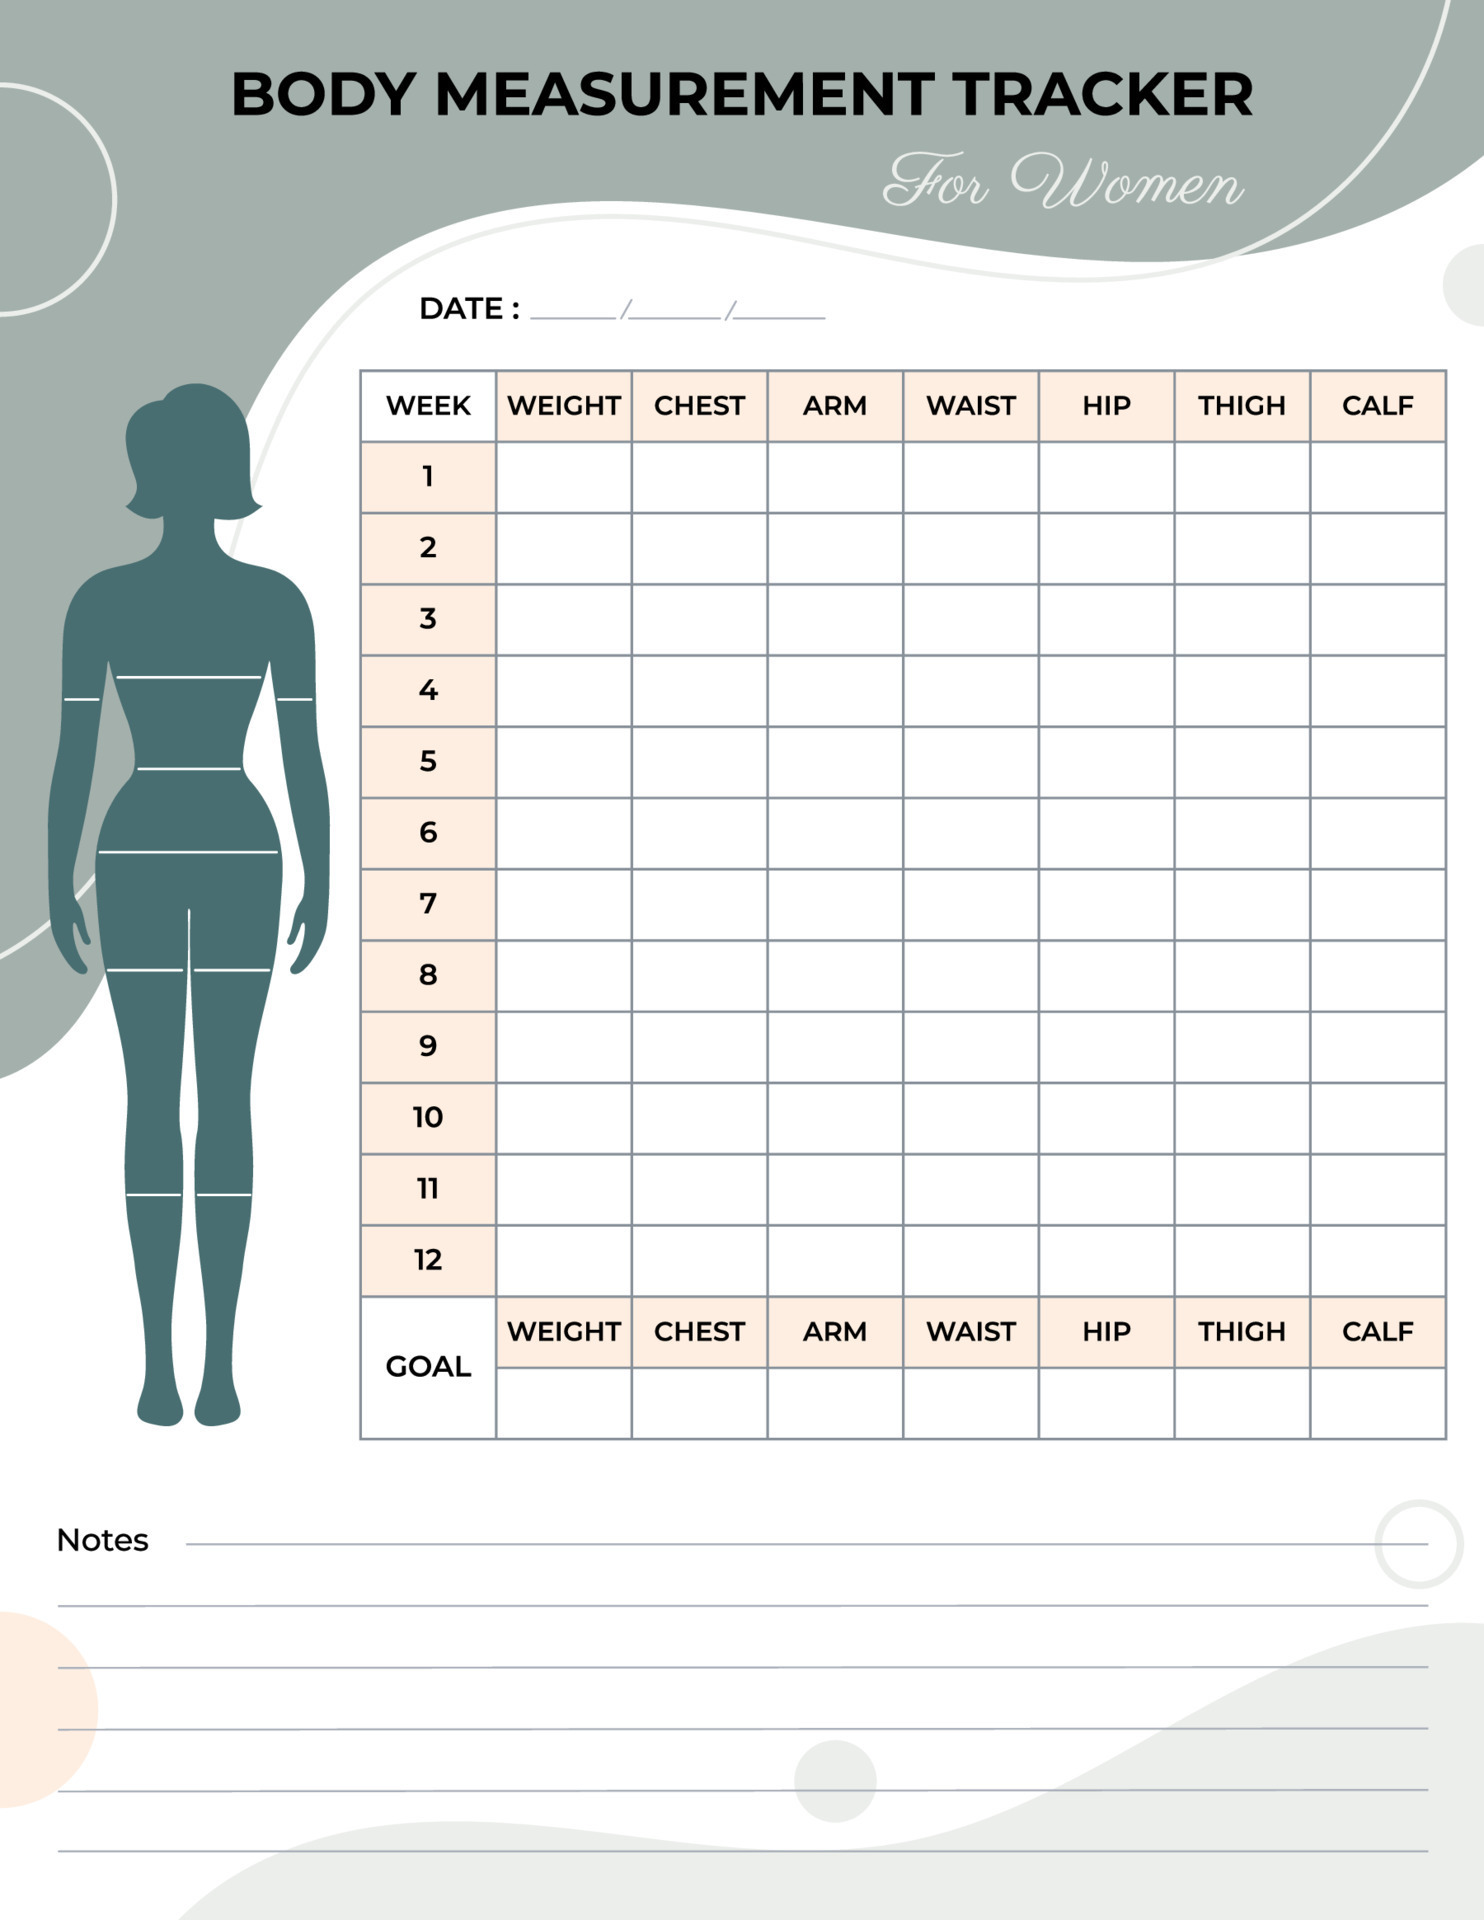 https://static.vecteezy.com/system/resources/previews/010/017/978/original/body-measurement-tracker-for-weight-loss-for-women-vector.jpg